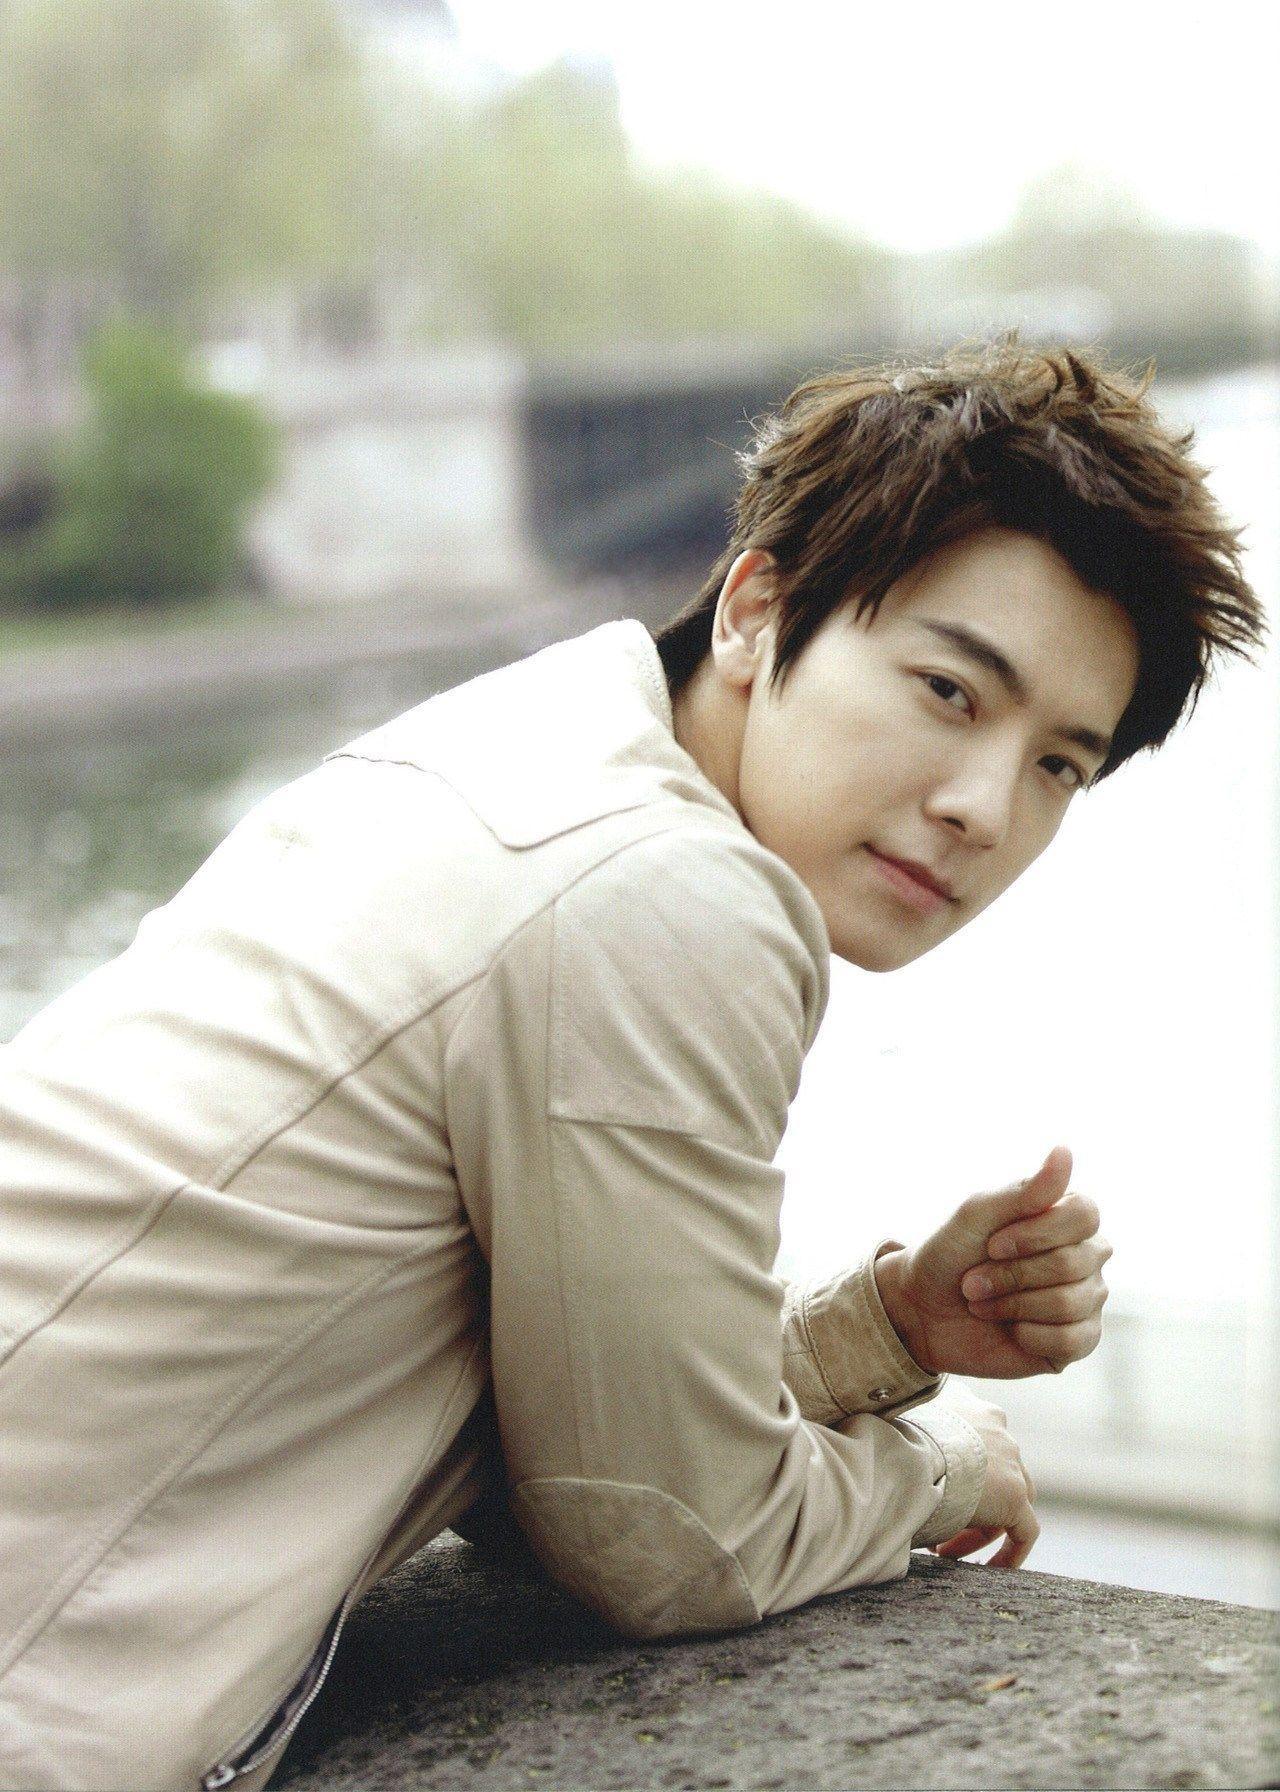 Lee Donghae. Known people people news and biographies